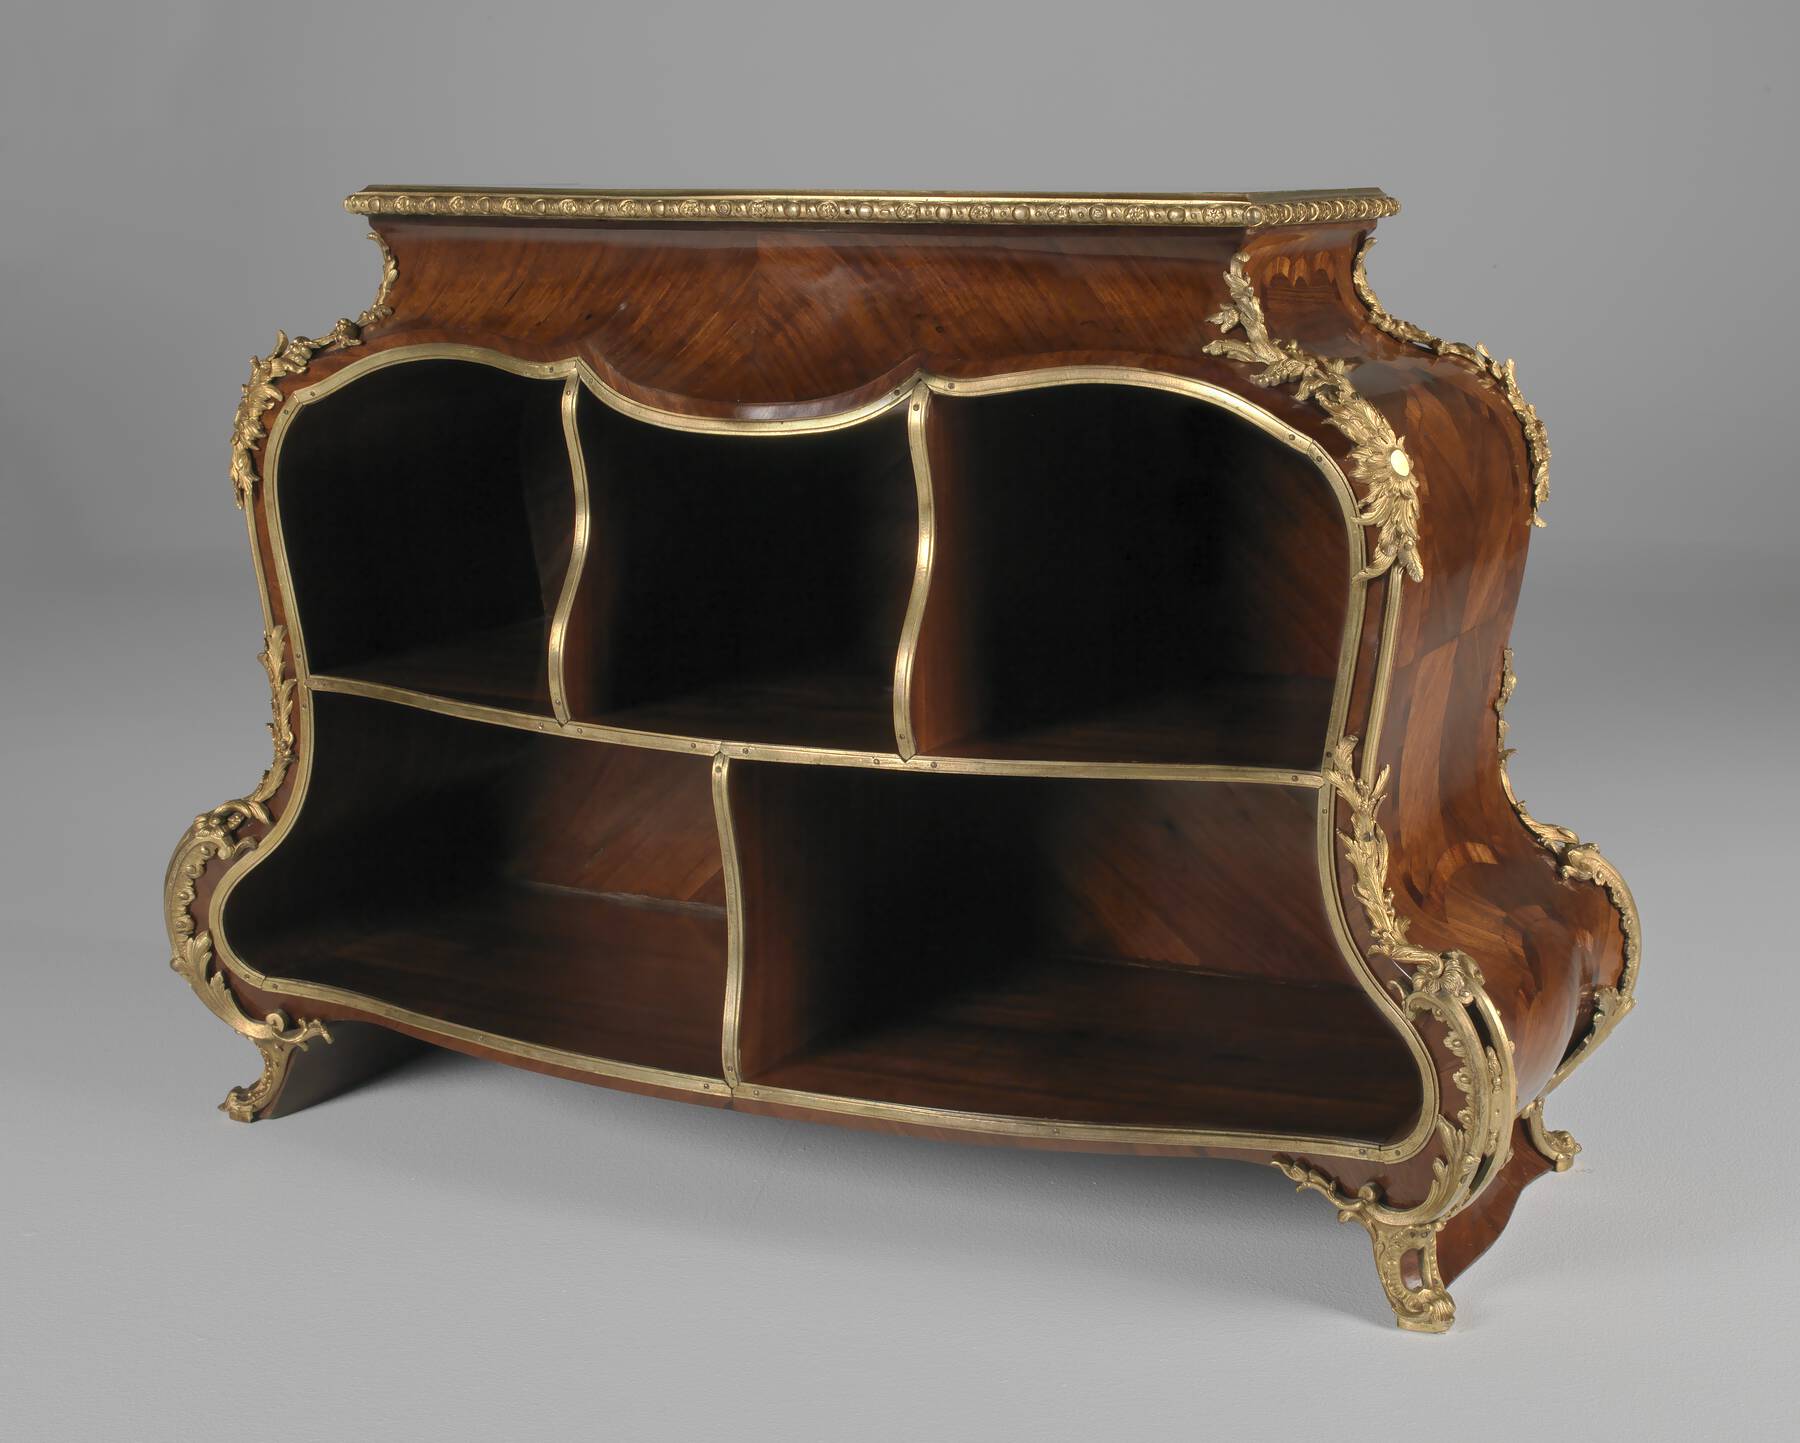 three-quarter view of a dark wood cartonnier with veneer, floral gilt bronze mounts, and five filing compartments